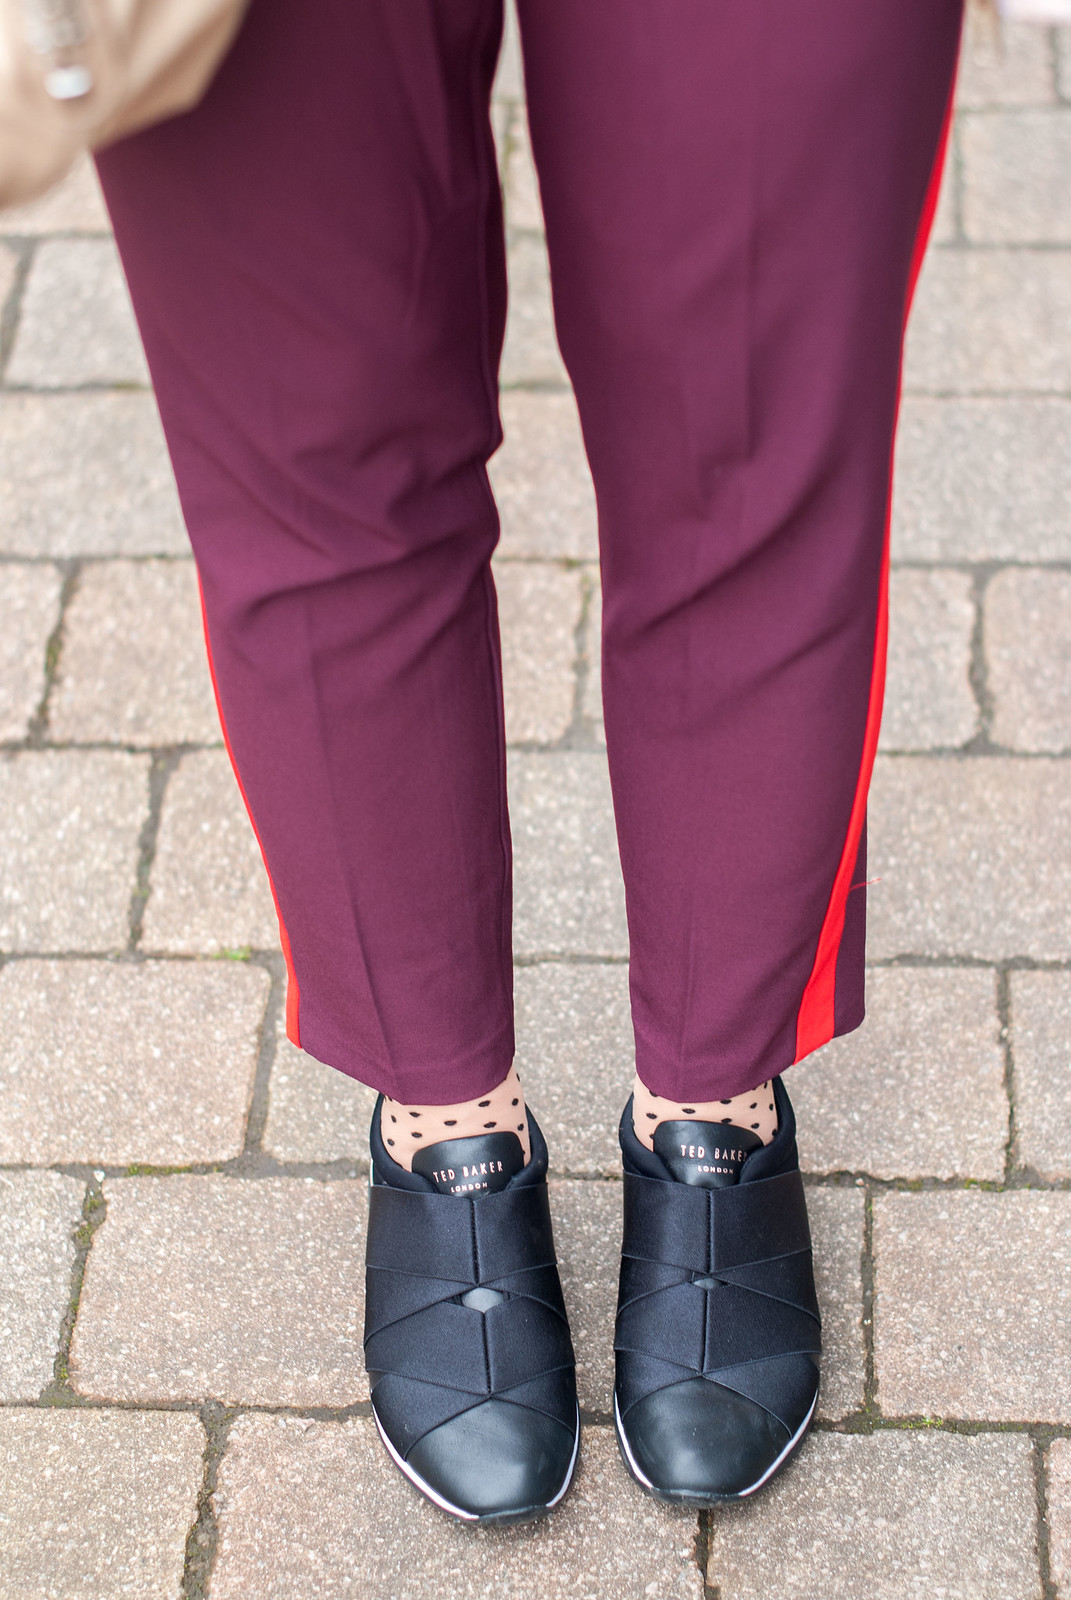 Beating April Showers in Metallics and Warm Colours \ rose gold raincoat \ orange-red sweater \ burgundy and red stripe trousers pants \ Ted Baker Queane trainers sneakers \ polka dot socks | Not Dressed As Lamb, over 40 style